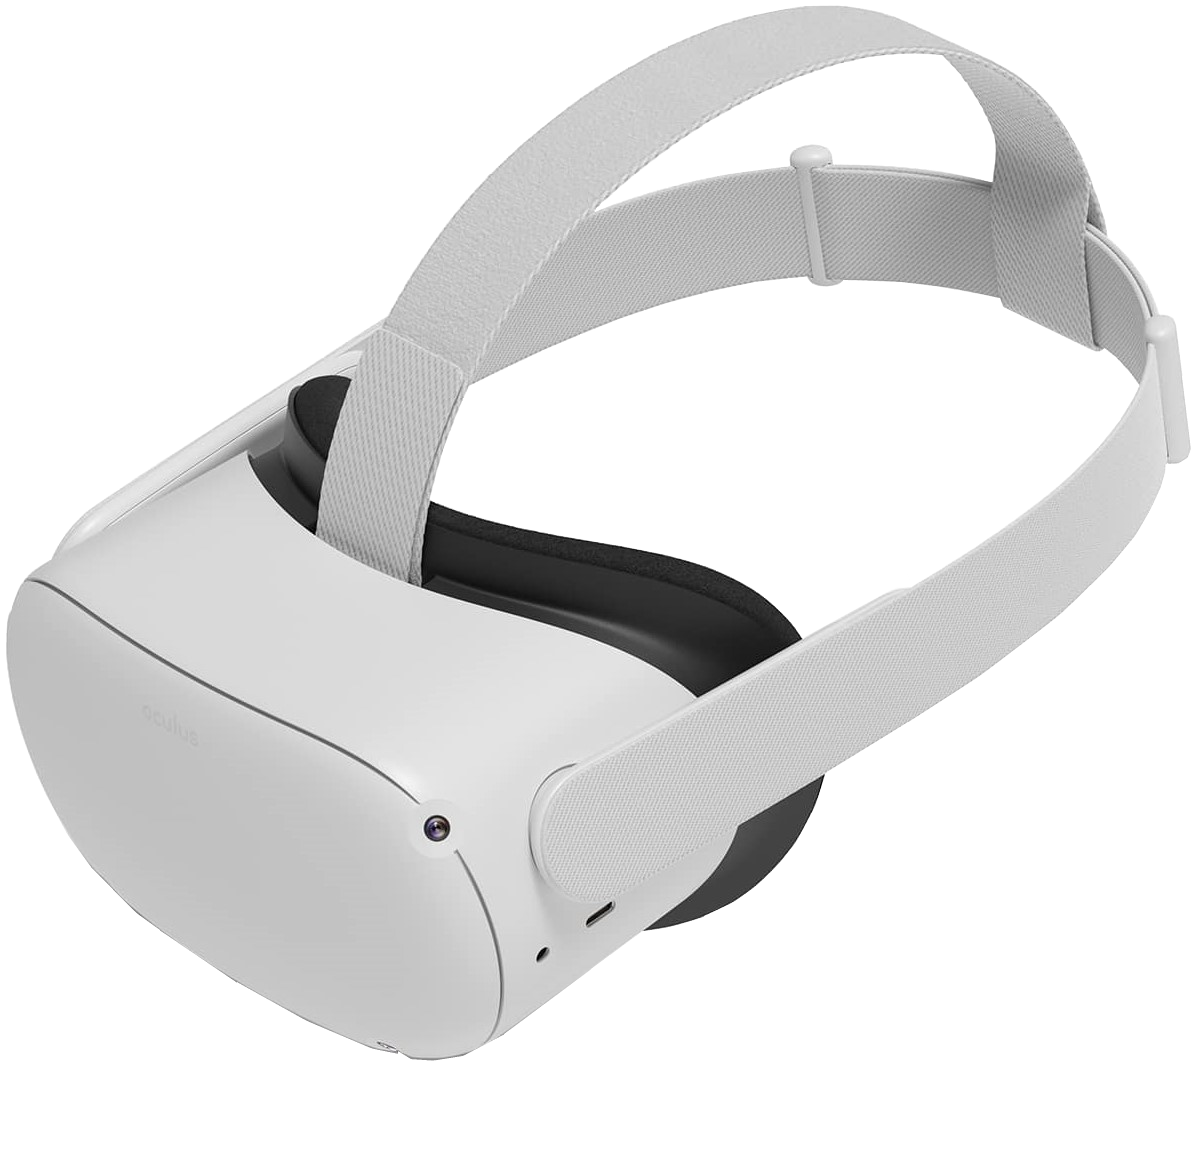 Android Forums: Should you get an Oculus Quest 2 or a PSVR?